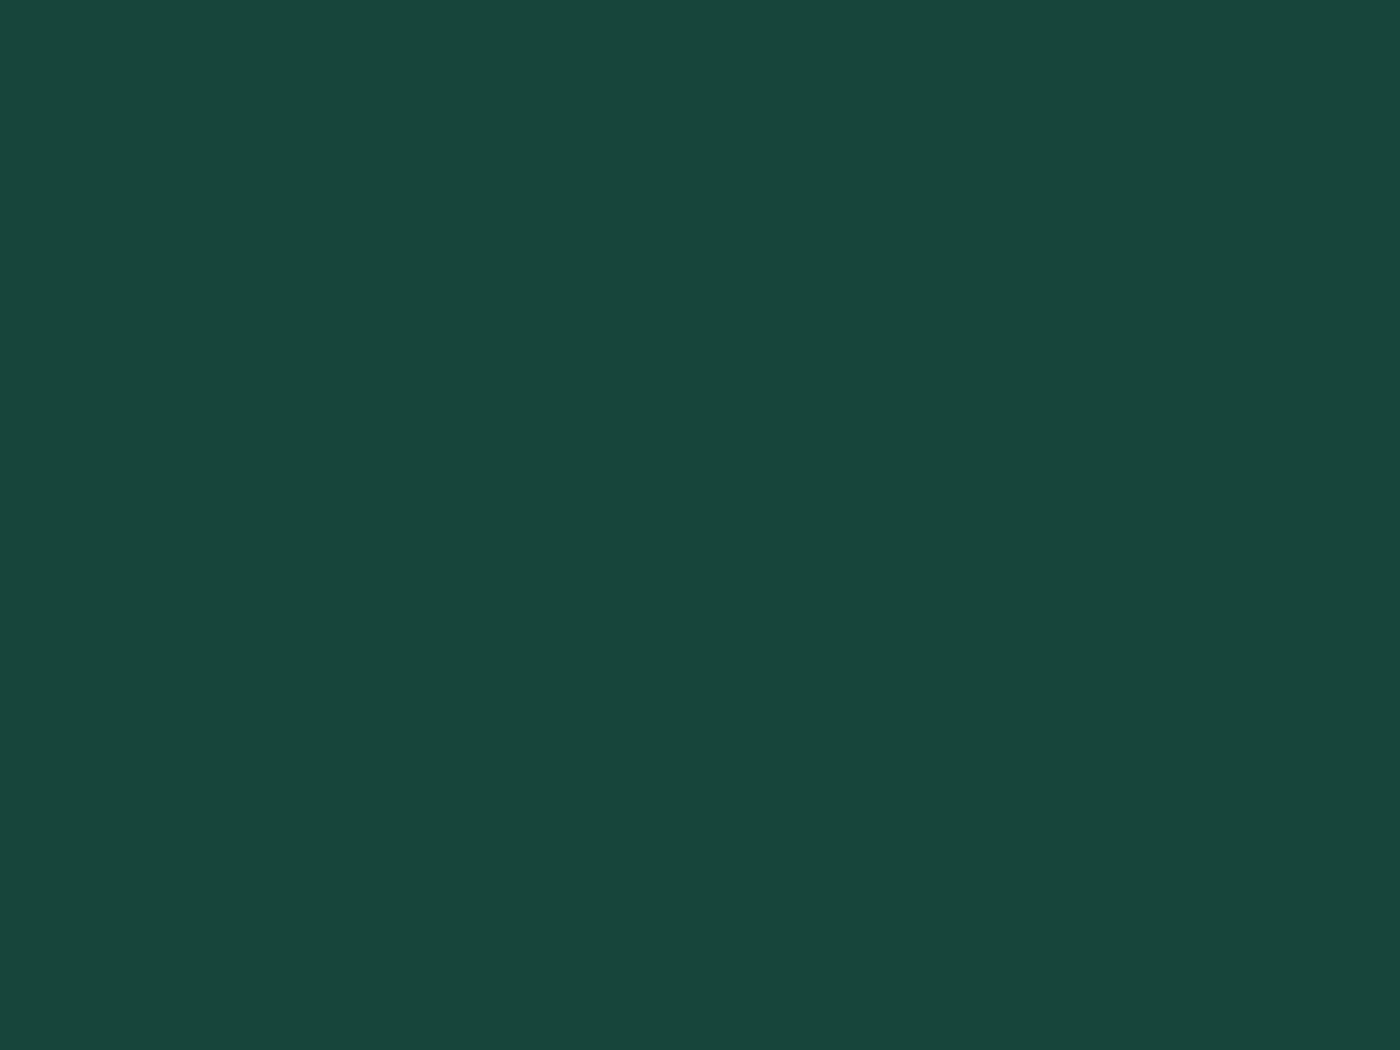 Resolution Msu Green Solid Color Background And